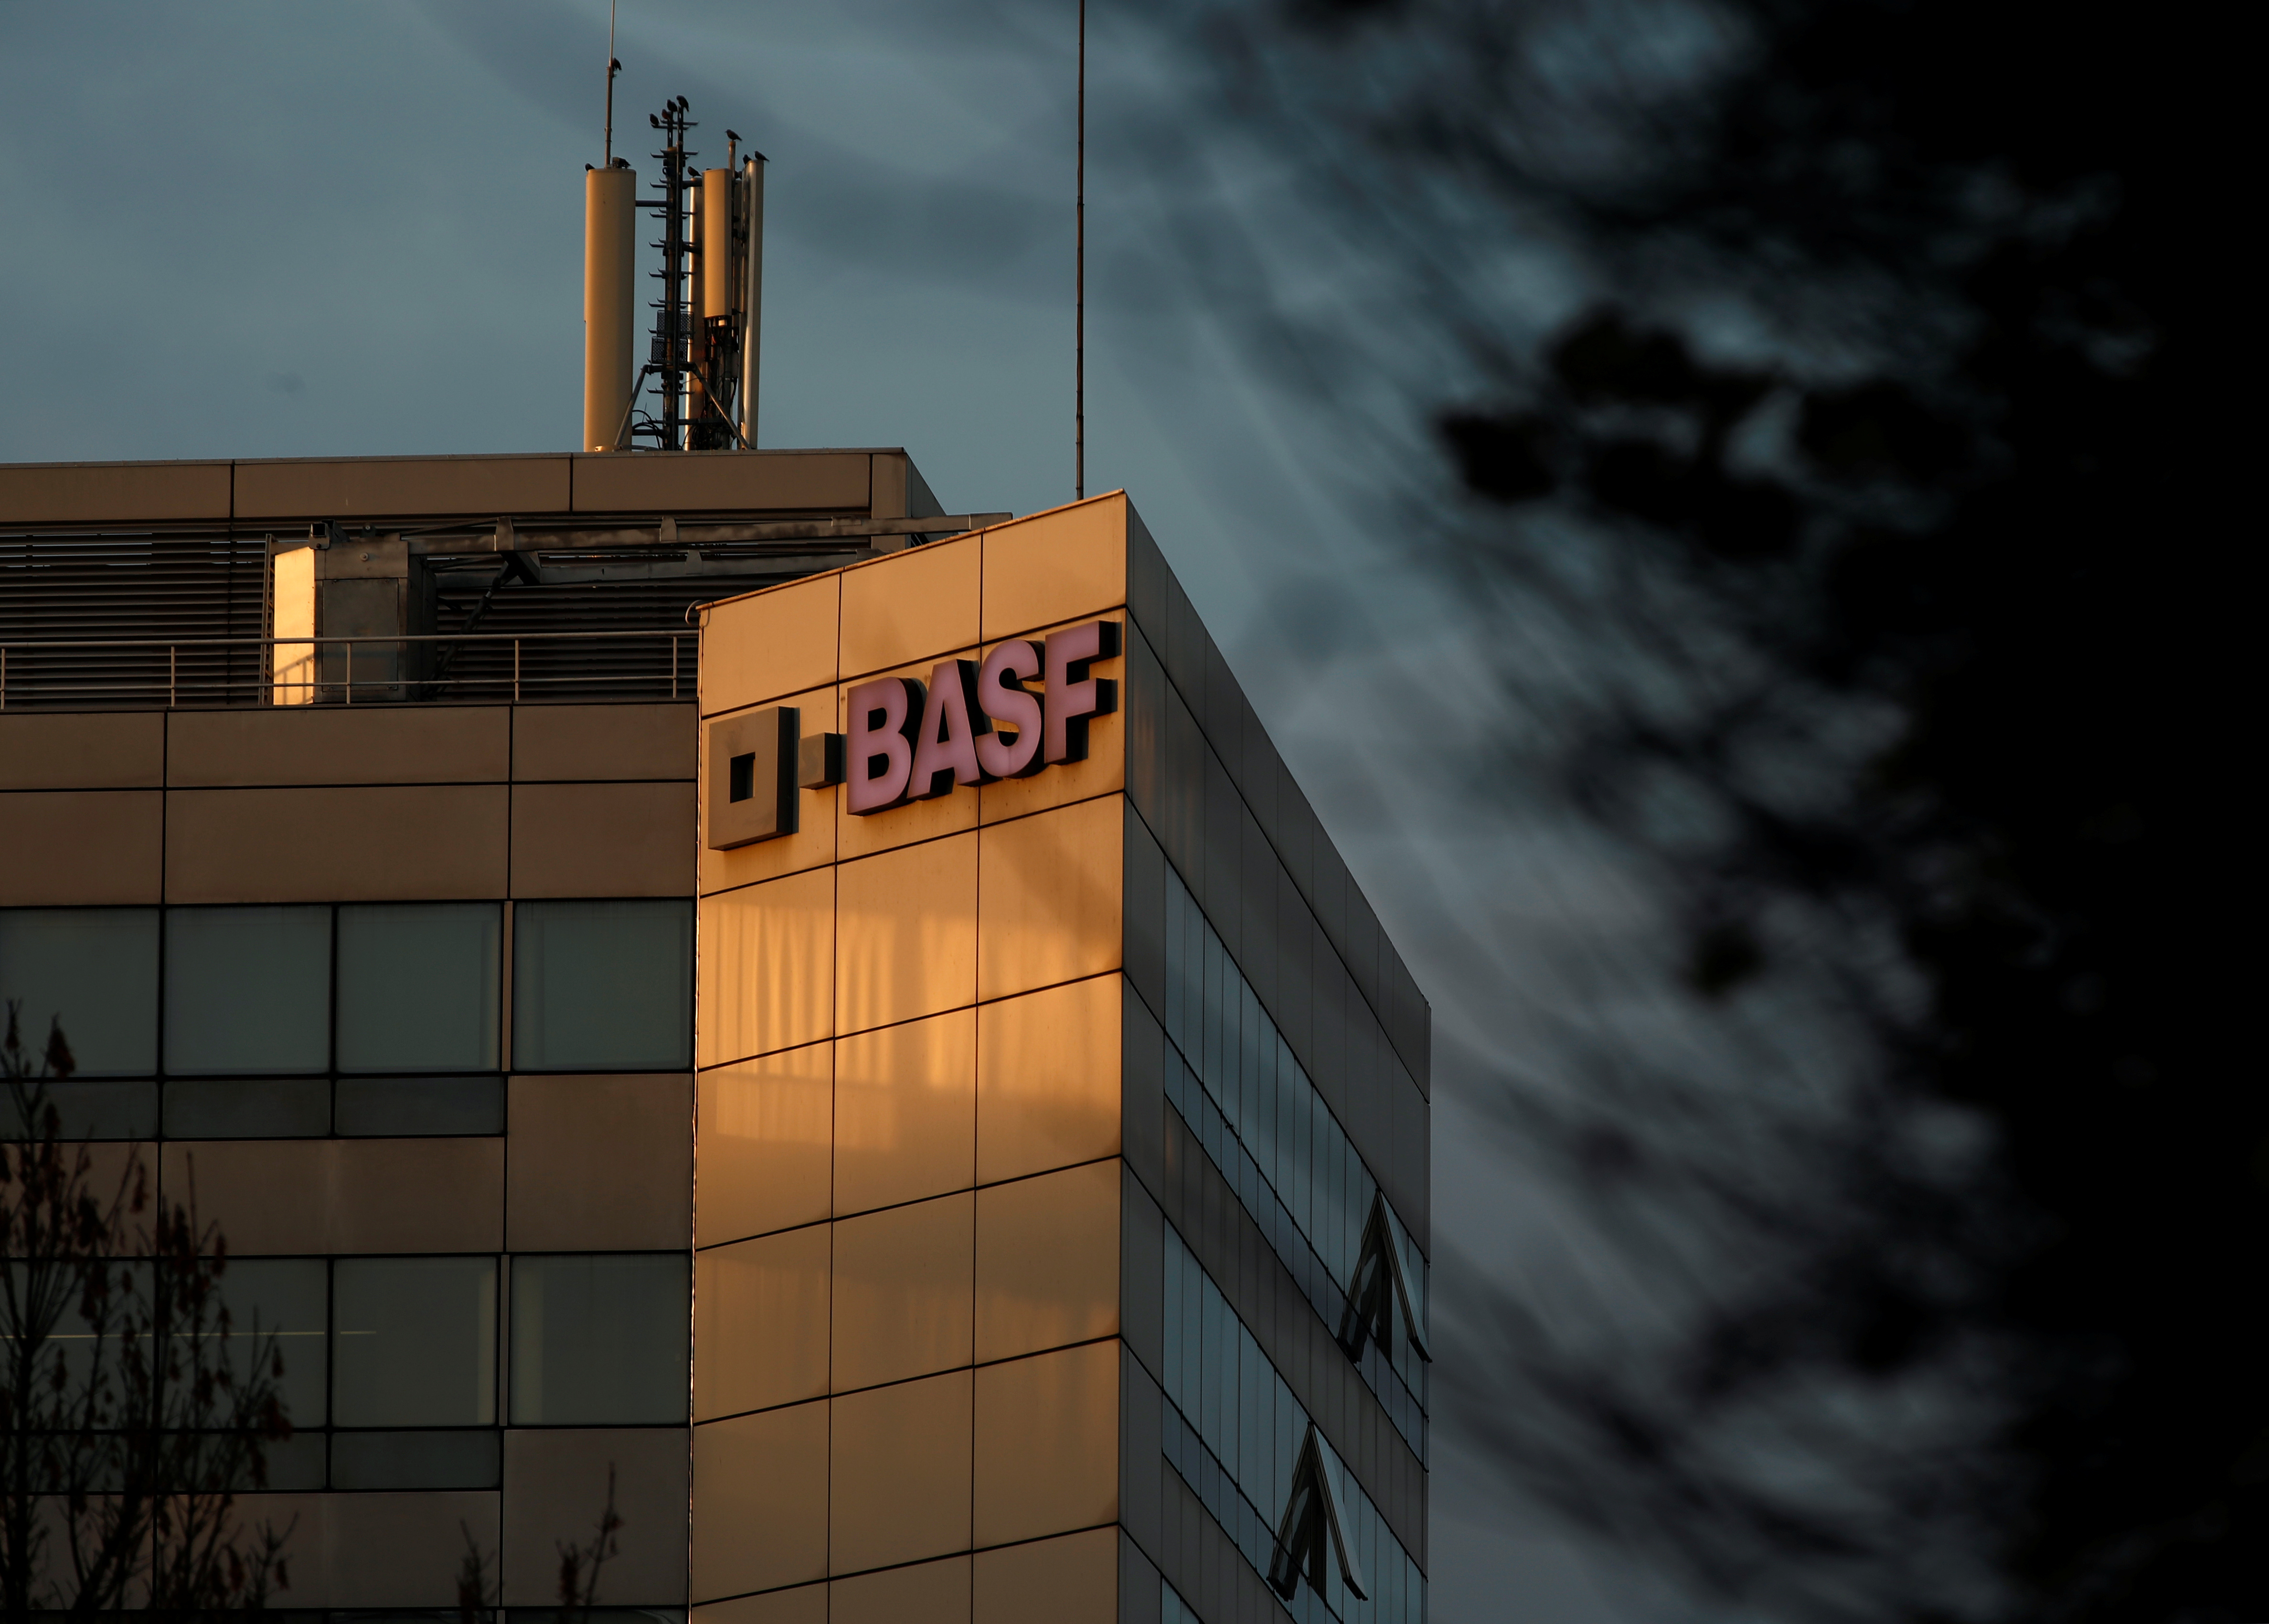  The chemical company BASF building in Levallois-Perret, near Paris, France, is seen at sunset, November 29, 2018. REUTERS/Christian Hartmann/File photo